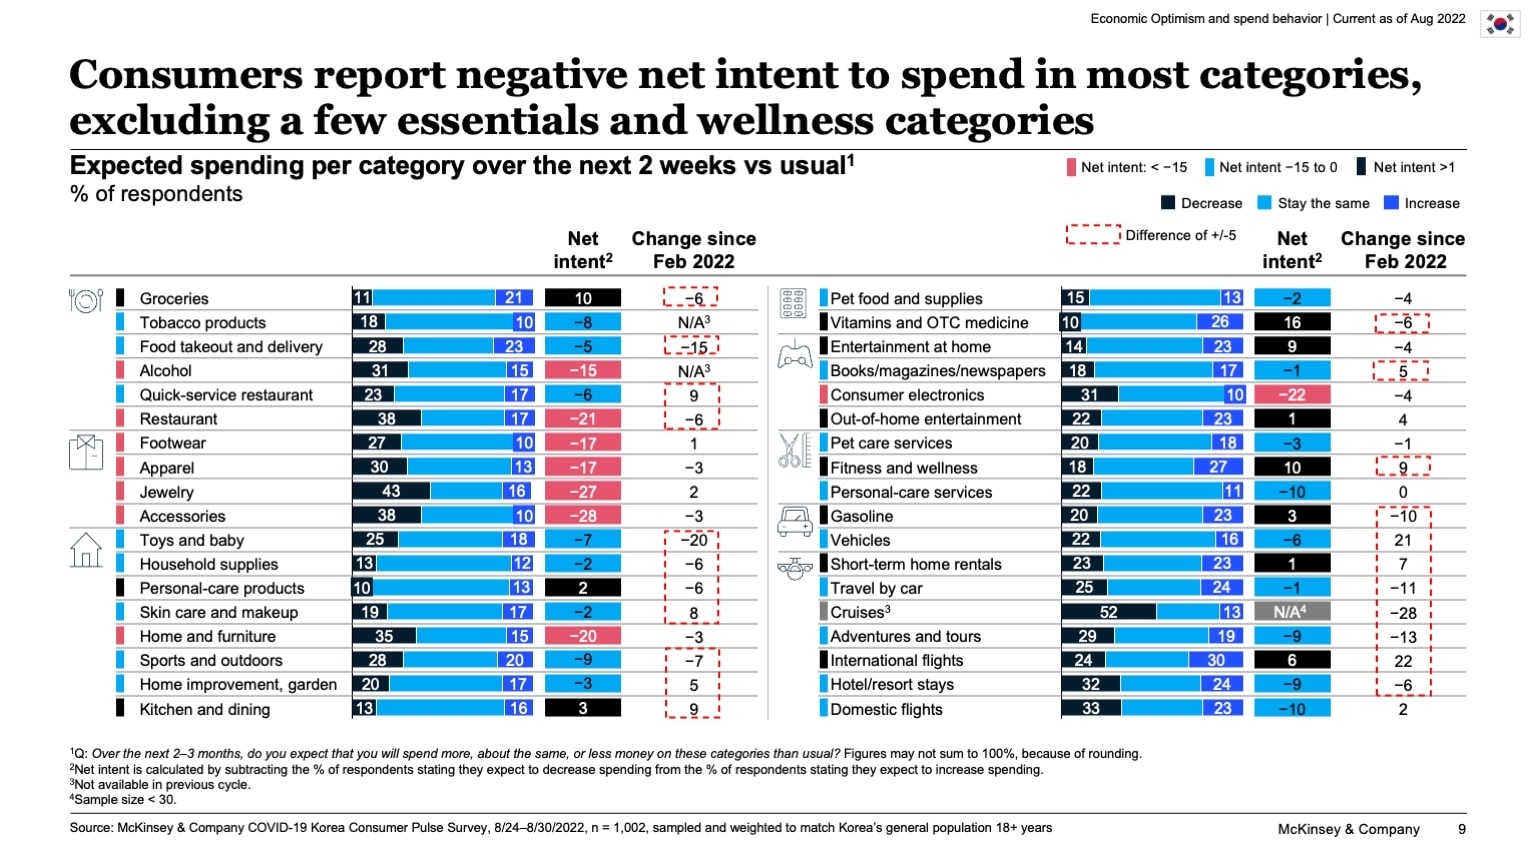 Consumers report negative net intent to spend in most categories, excluding a few essentials and wellness categories